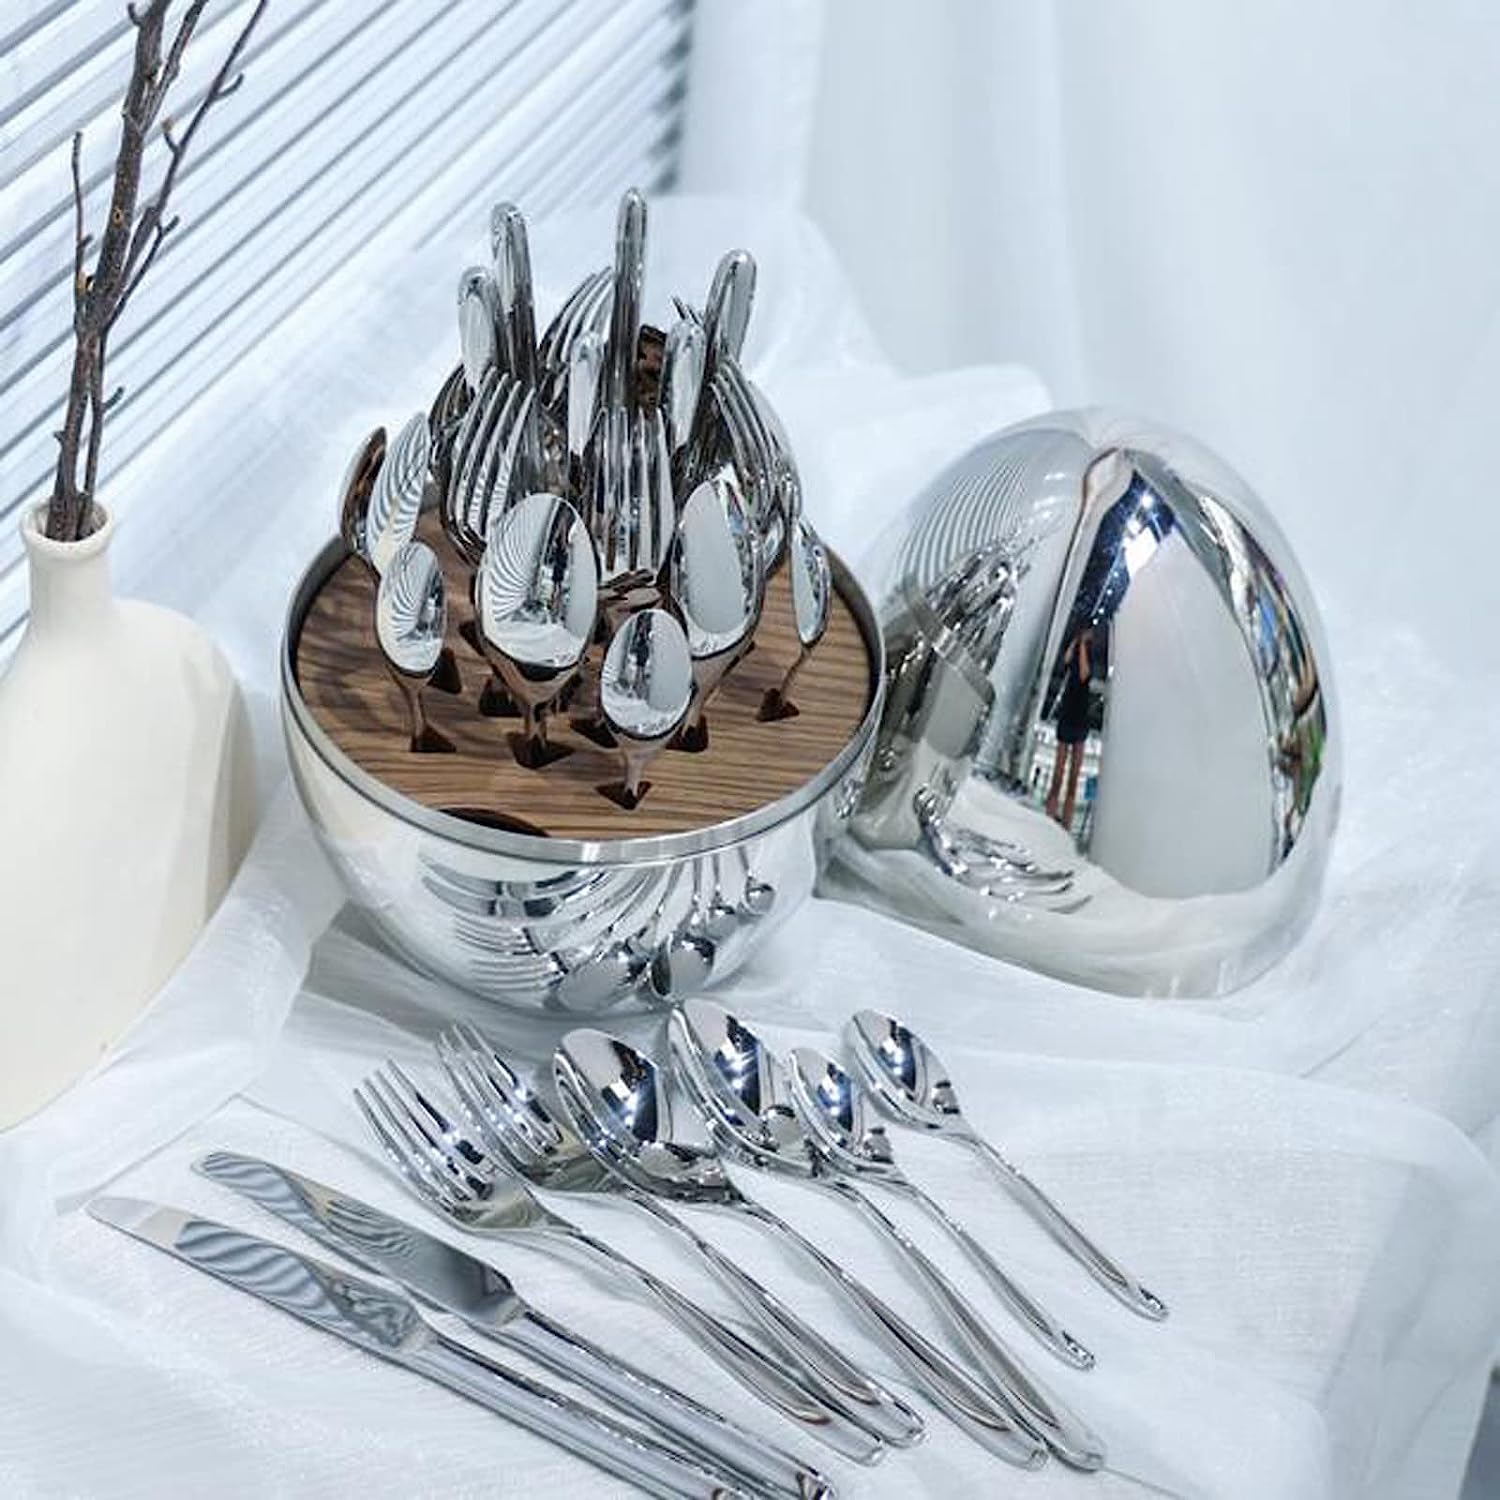 Egg-Shaped Cutlery Organizer with Storage, Mirror Polished Stainless Steel 24-Piece Cutlery Set